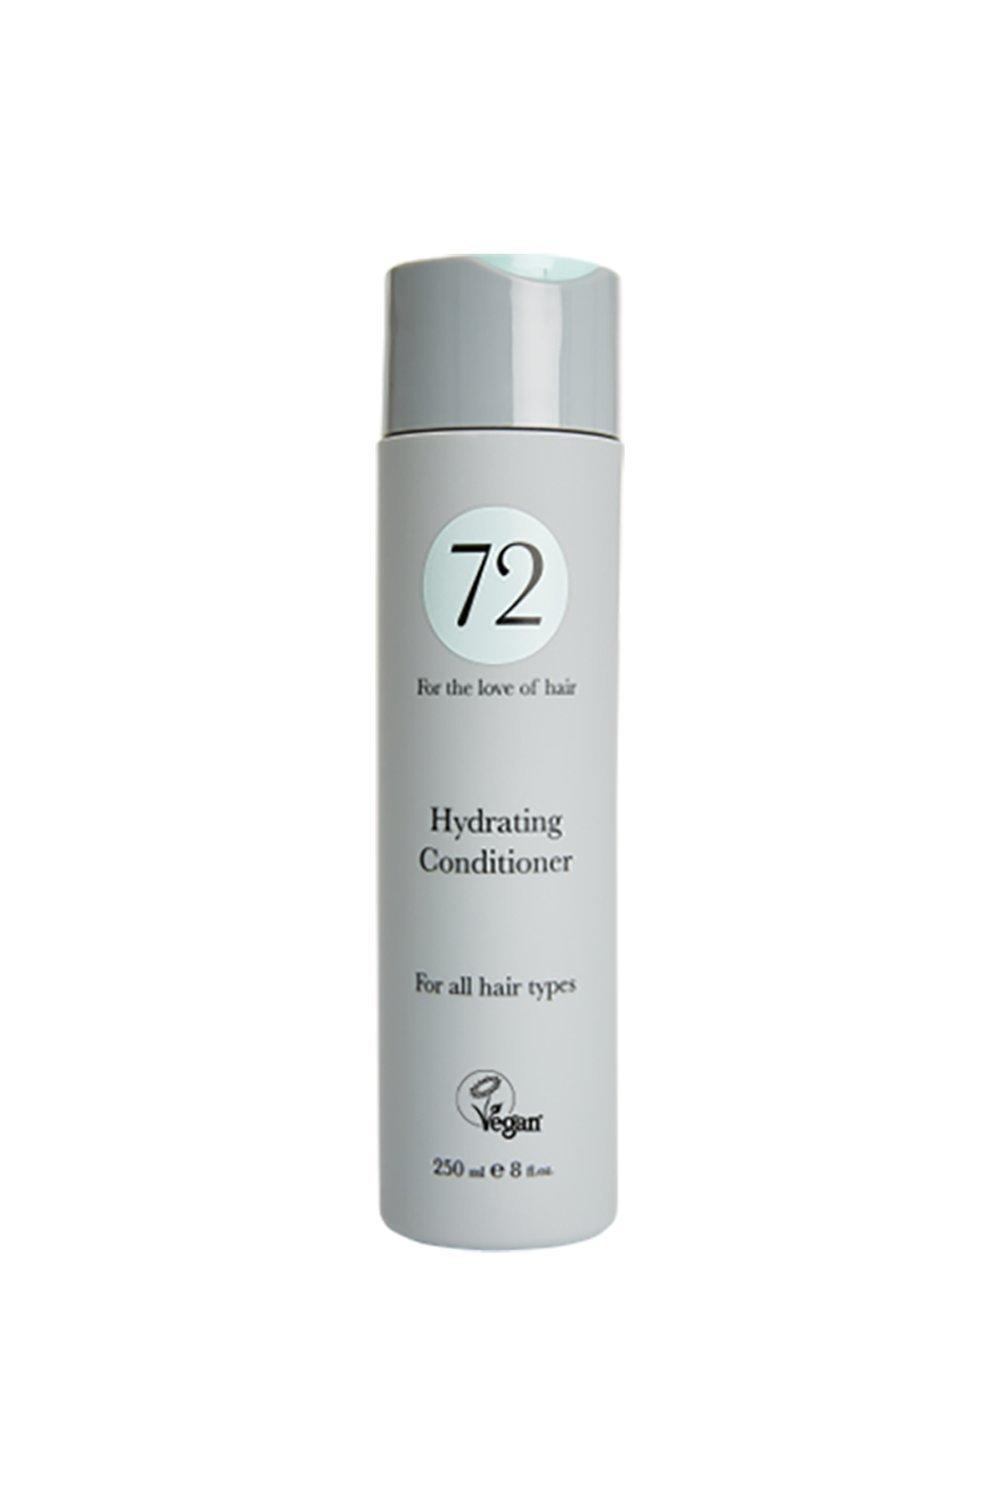 72 Hair Hydrating Conditioner|Size: 250ml